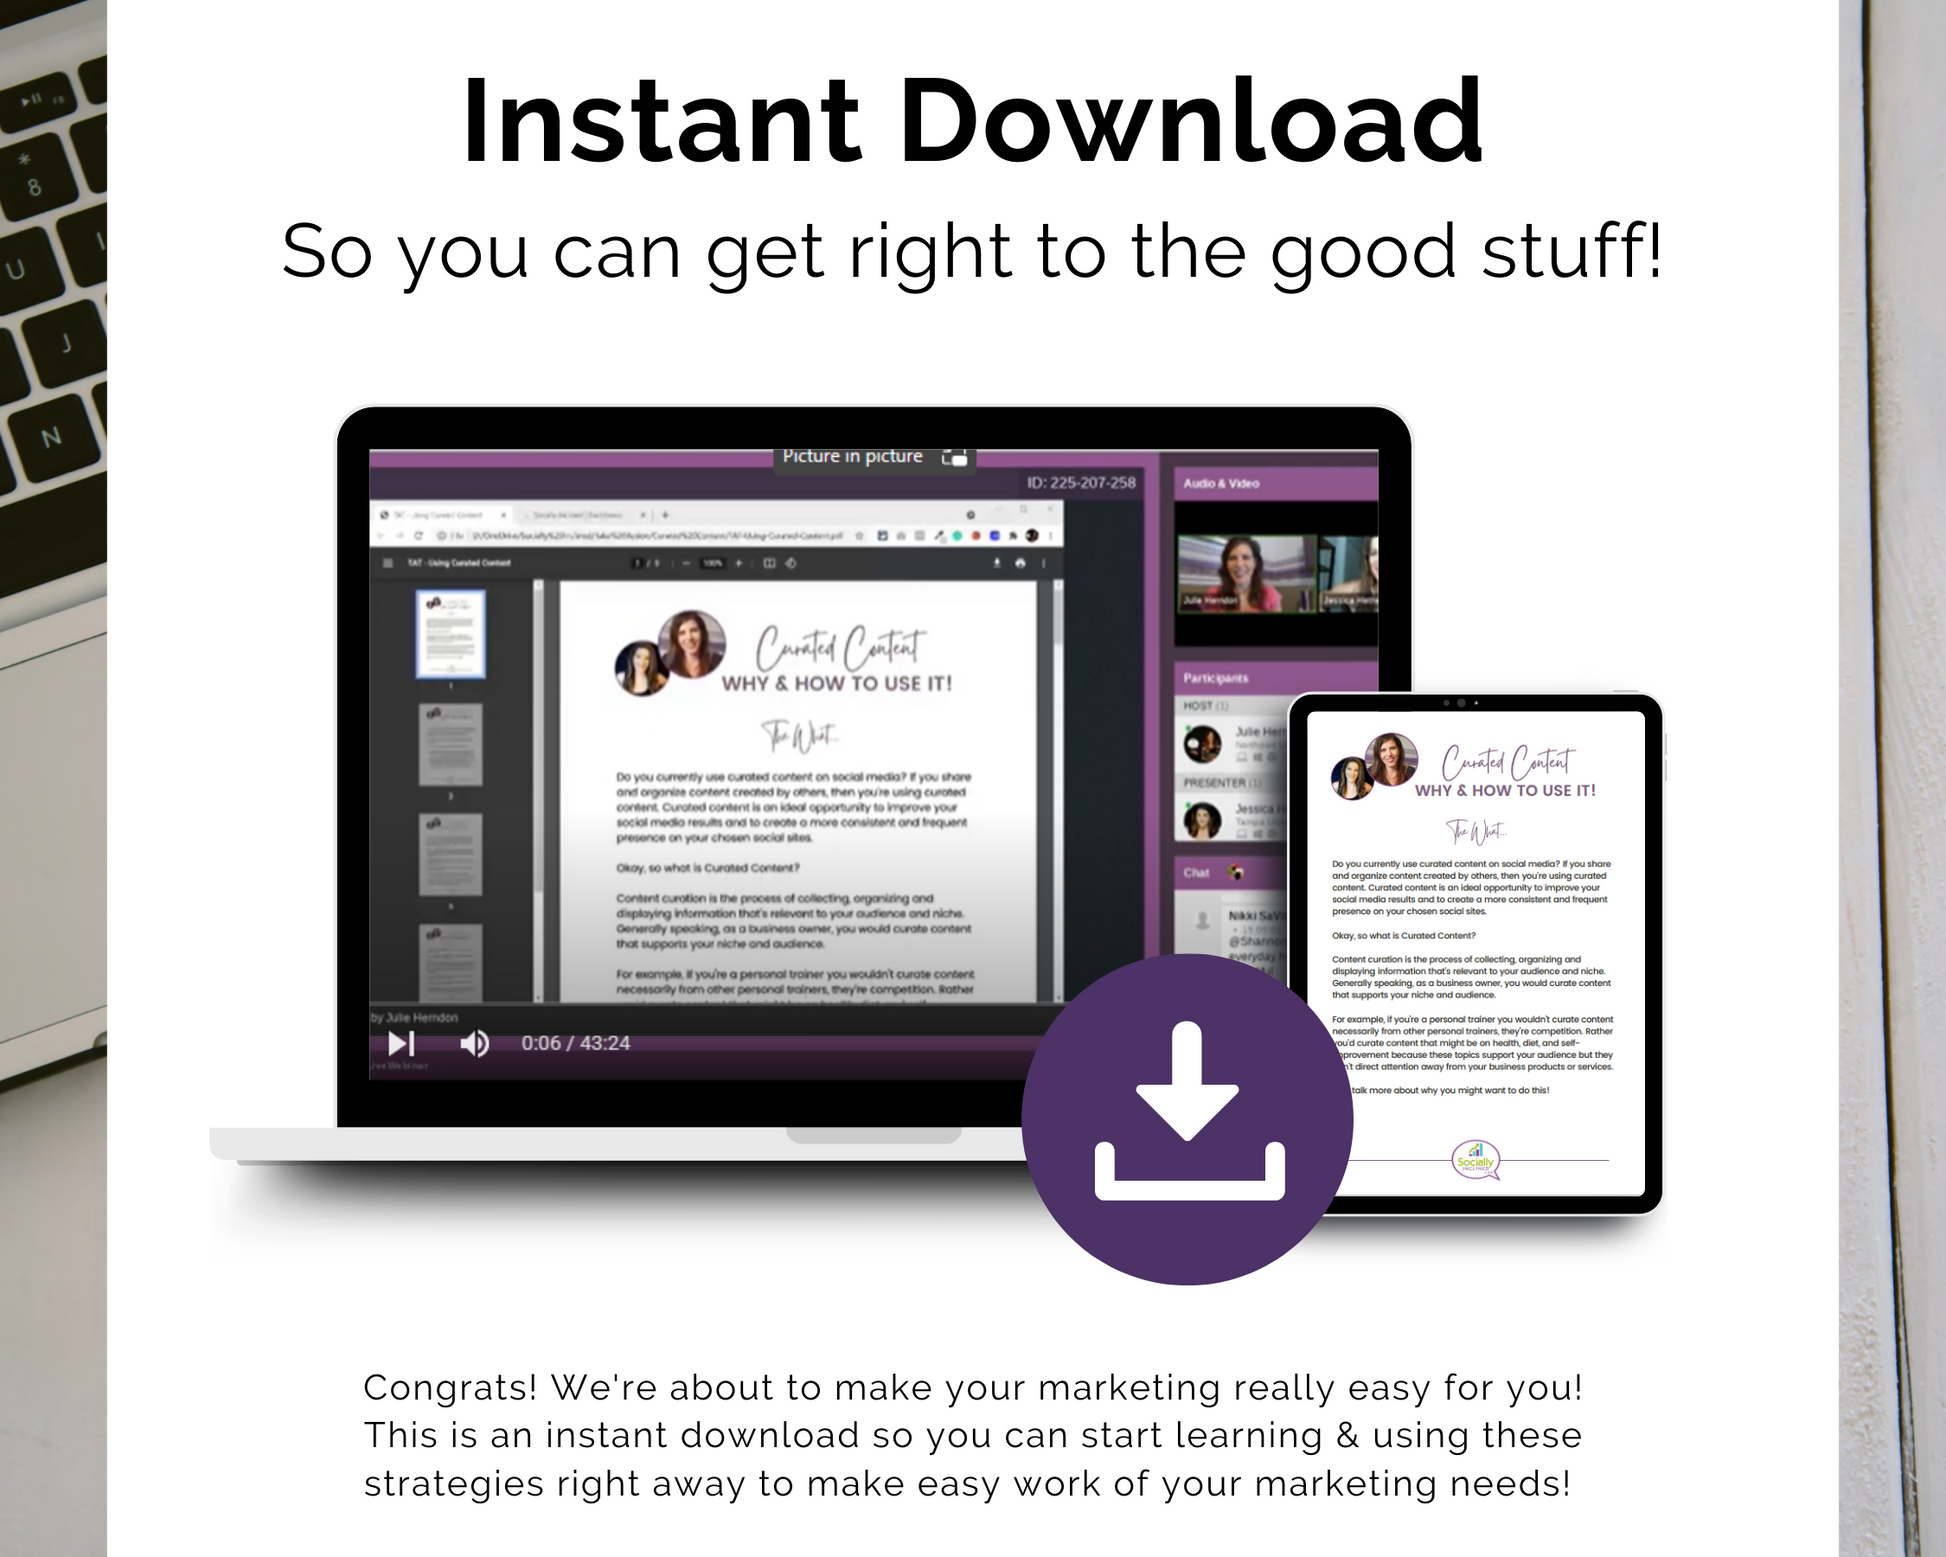 Instant download allows for quick access to the TAT - How to Use Curated Content Masterclass by Get Socially Inclined.